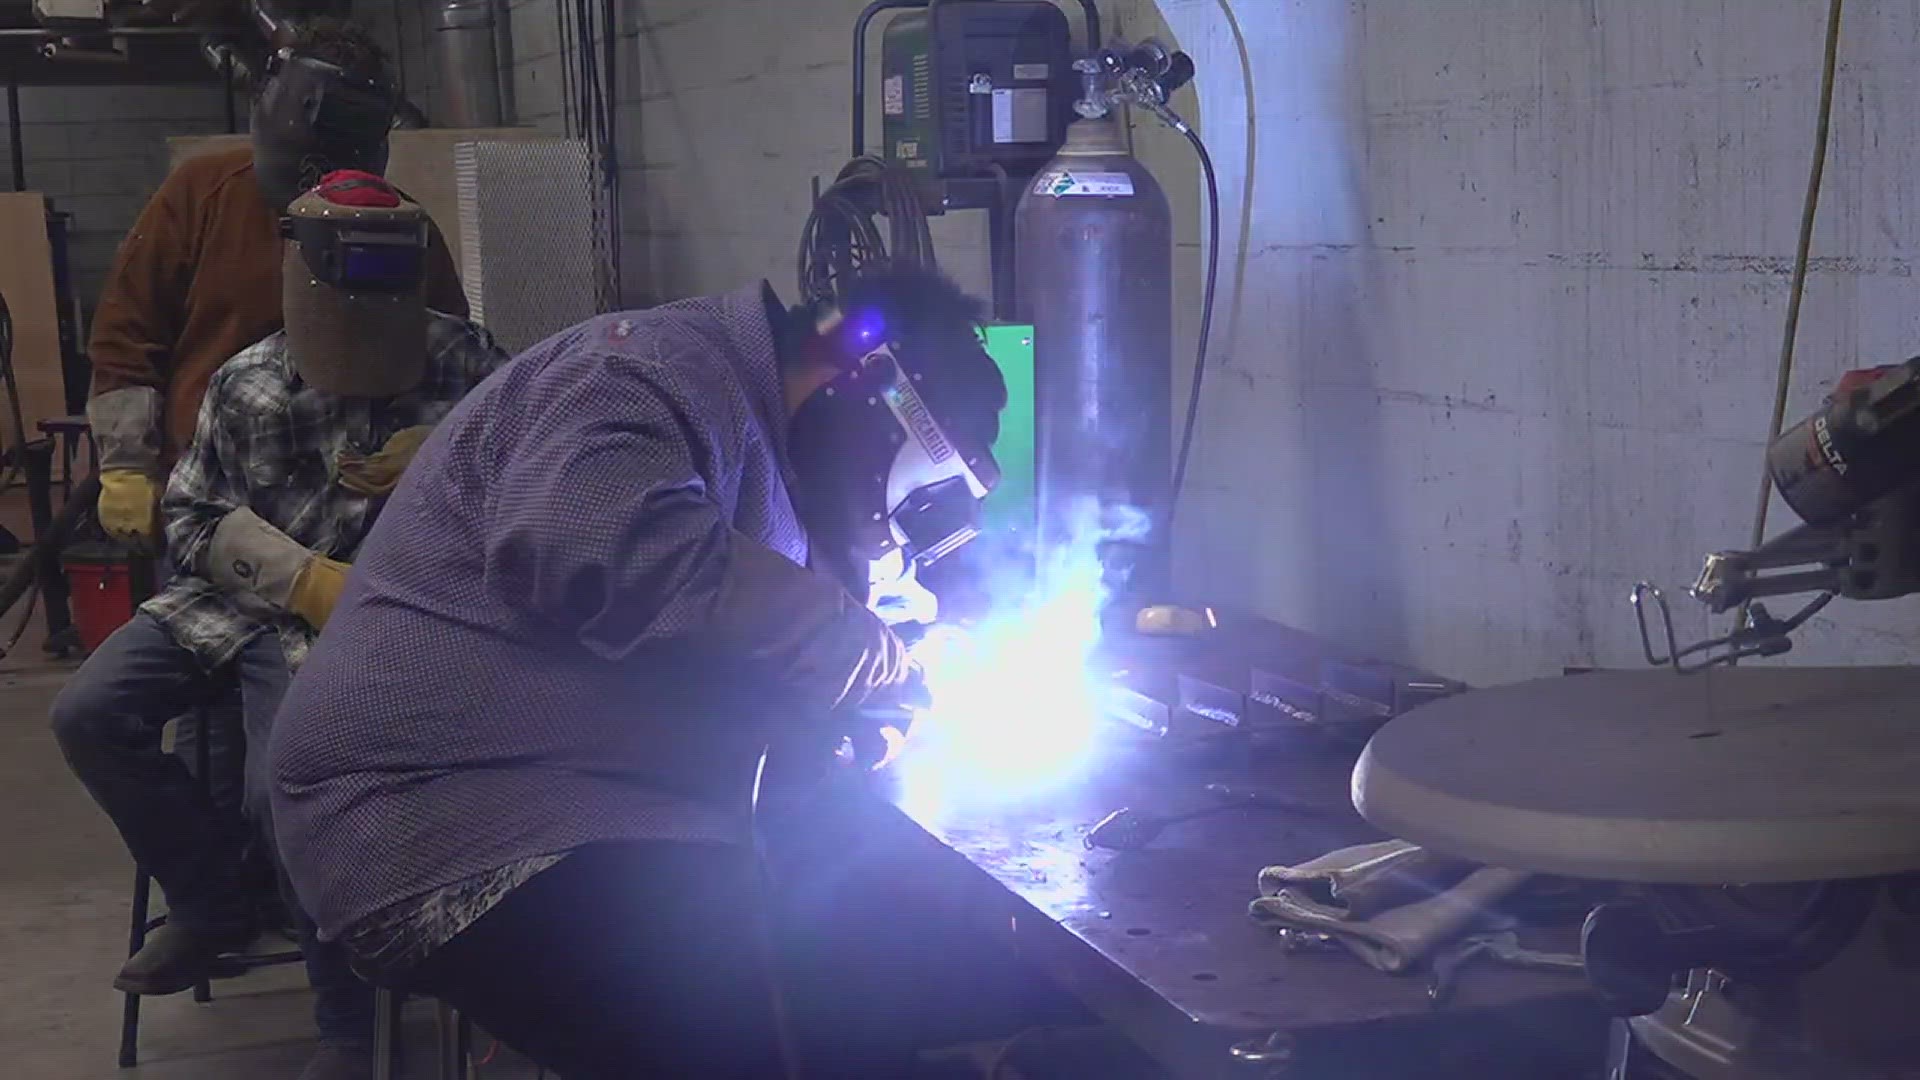 The two-semester program will give students a certificate in Level 1 Pipefitting.